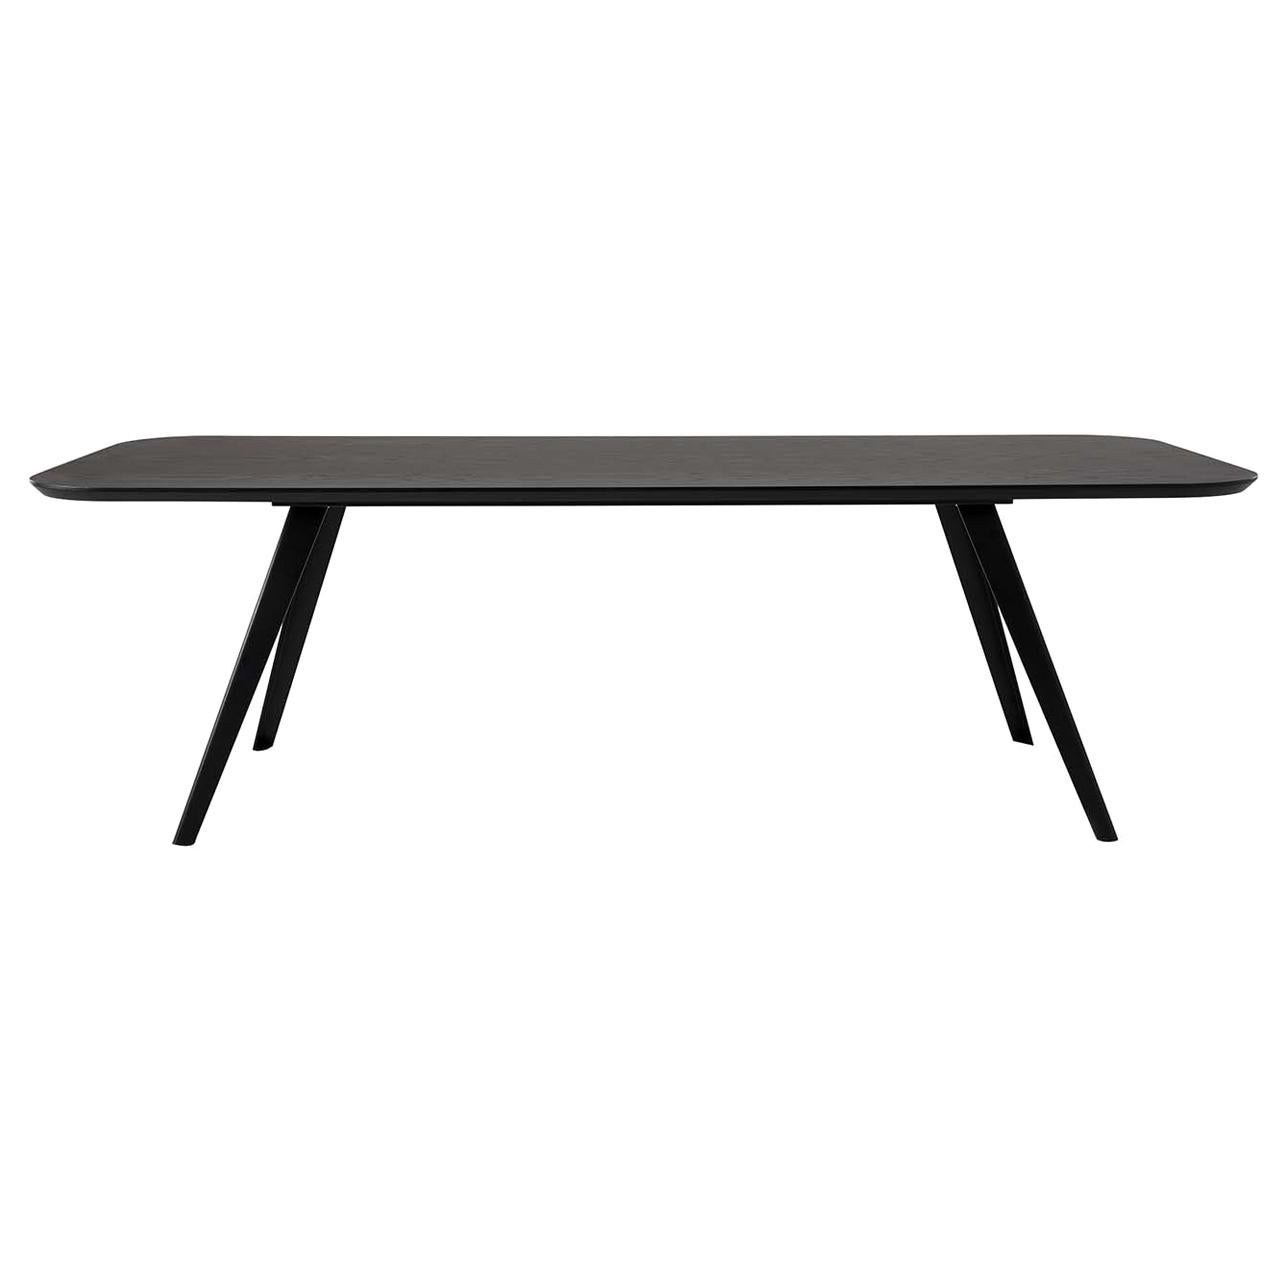 Aky Met Black Dining Table For Sale